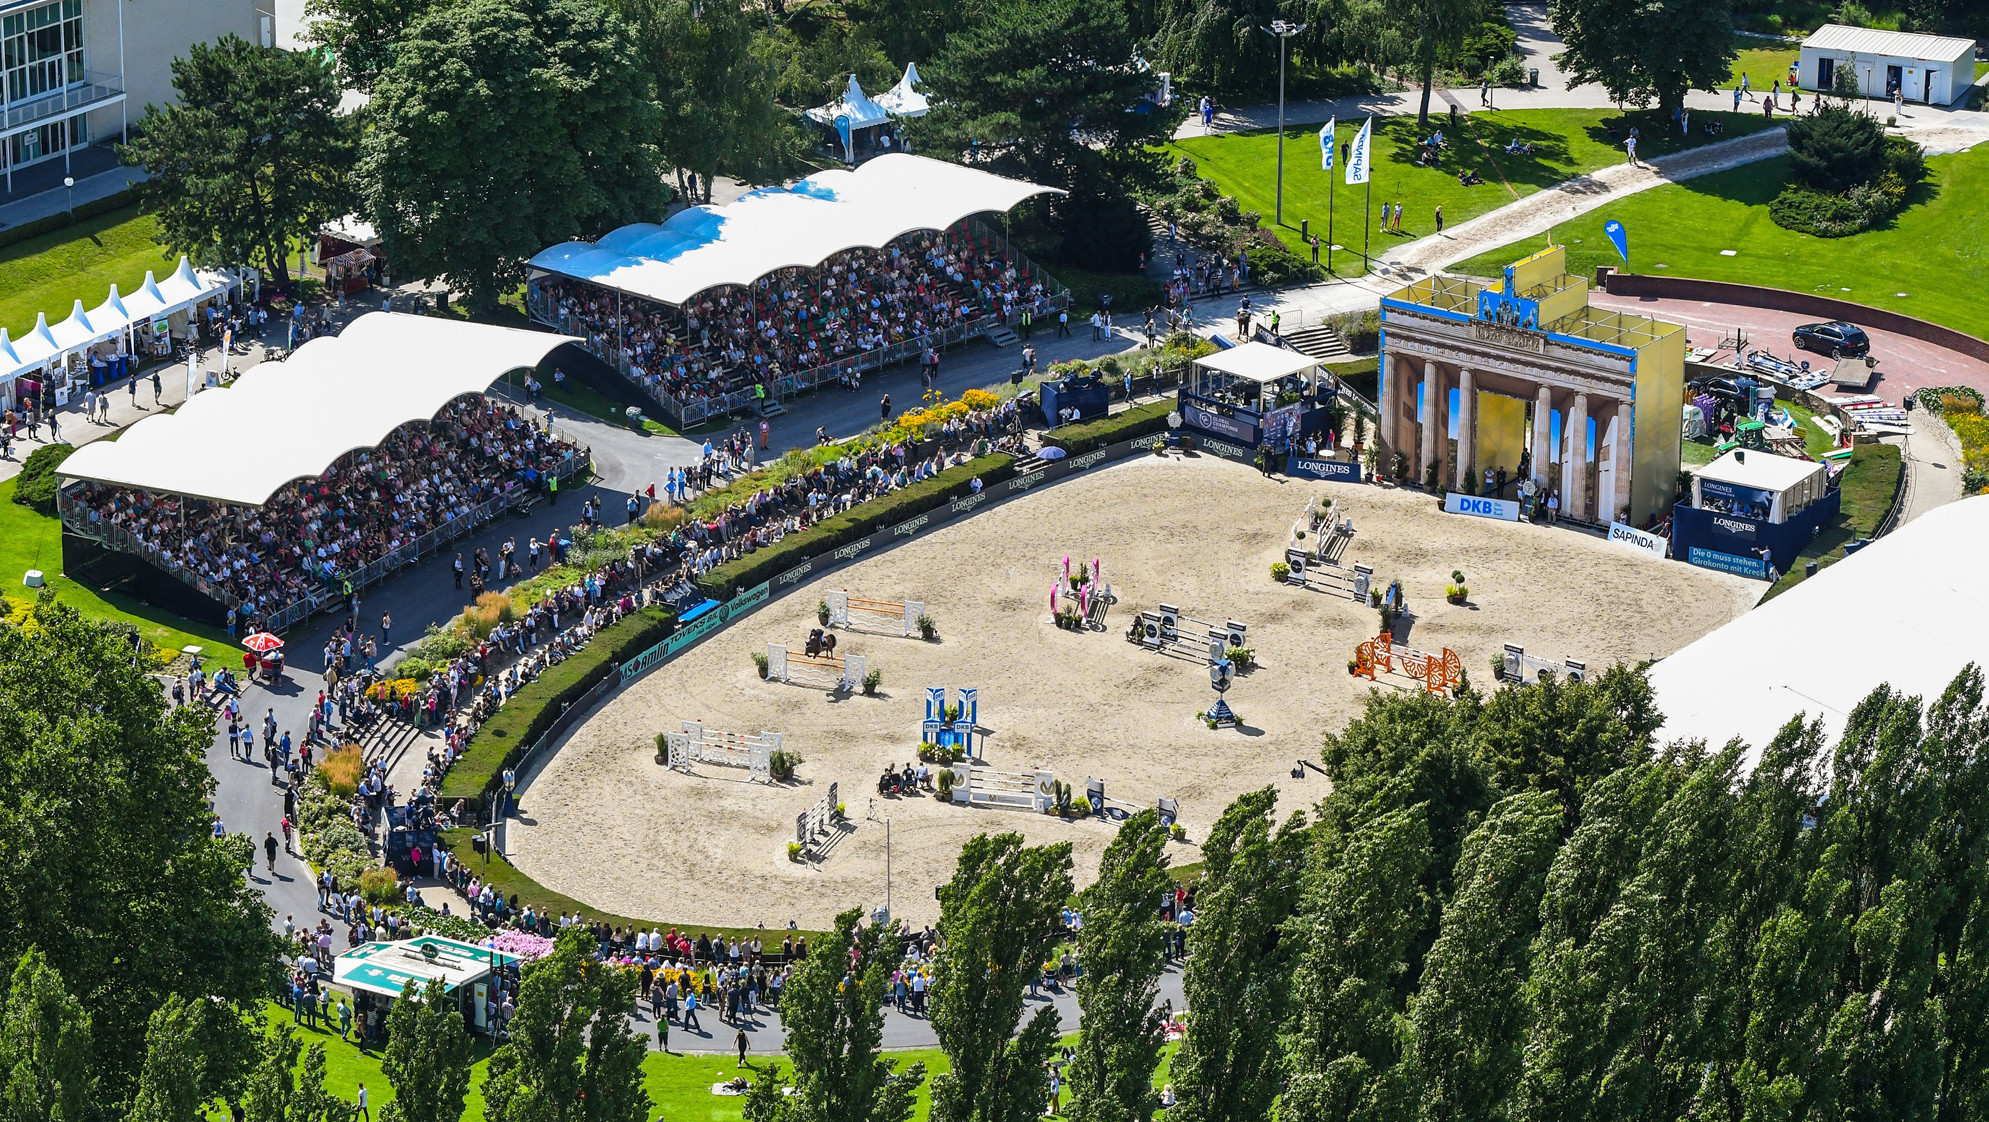 Show jumping stars will be out in force tomorrow in Berlin for the 13th leg of the 2019 Longines Global Champions Tour (LGCT) circuit in the heart of Germany's capital city ©LGCT/Stefano Grasso